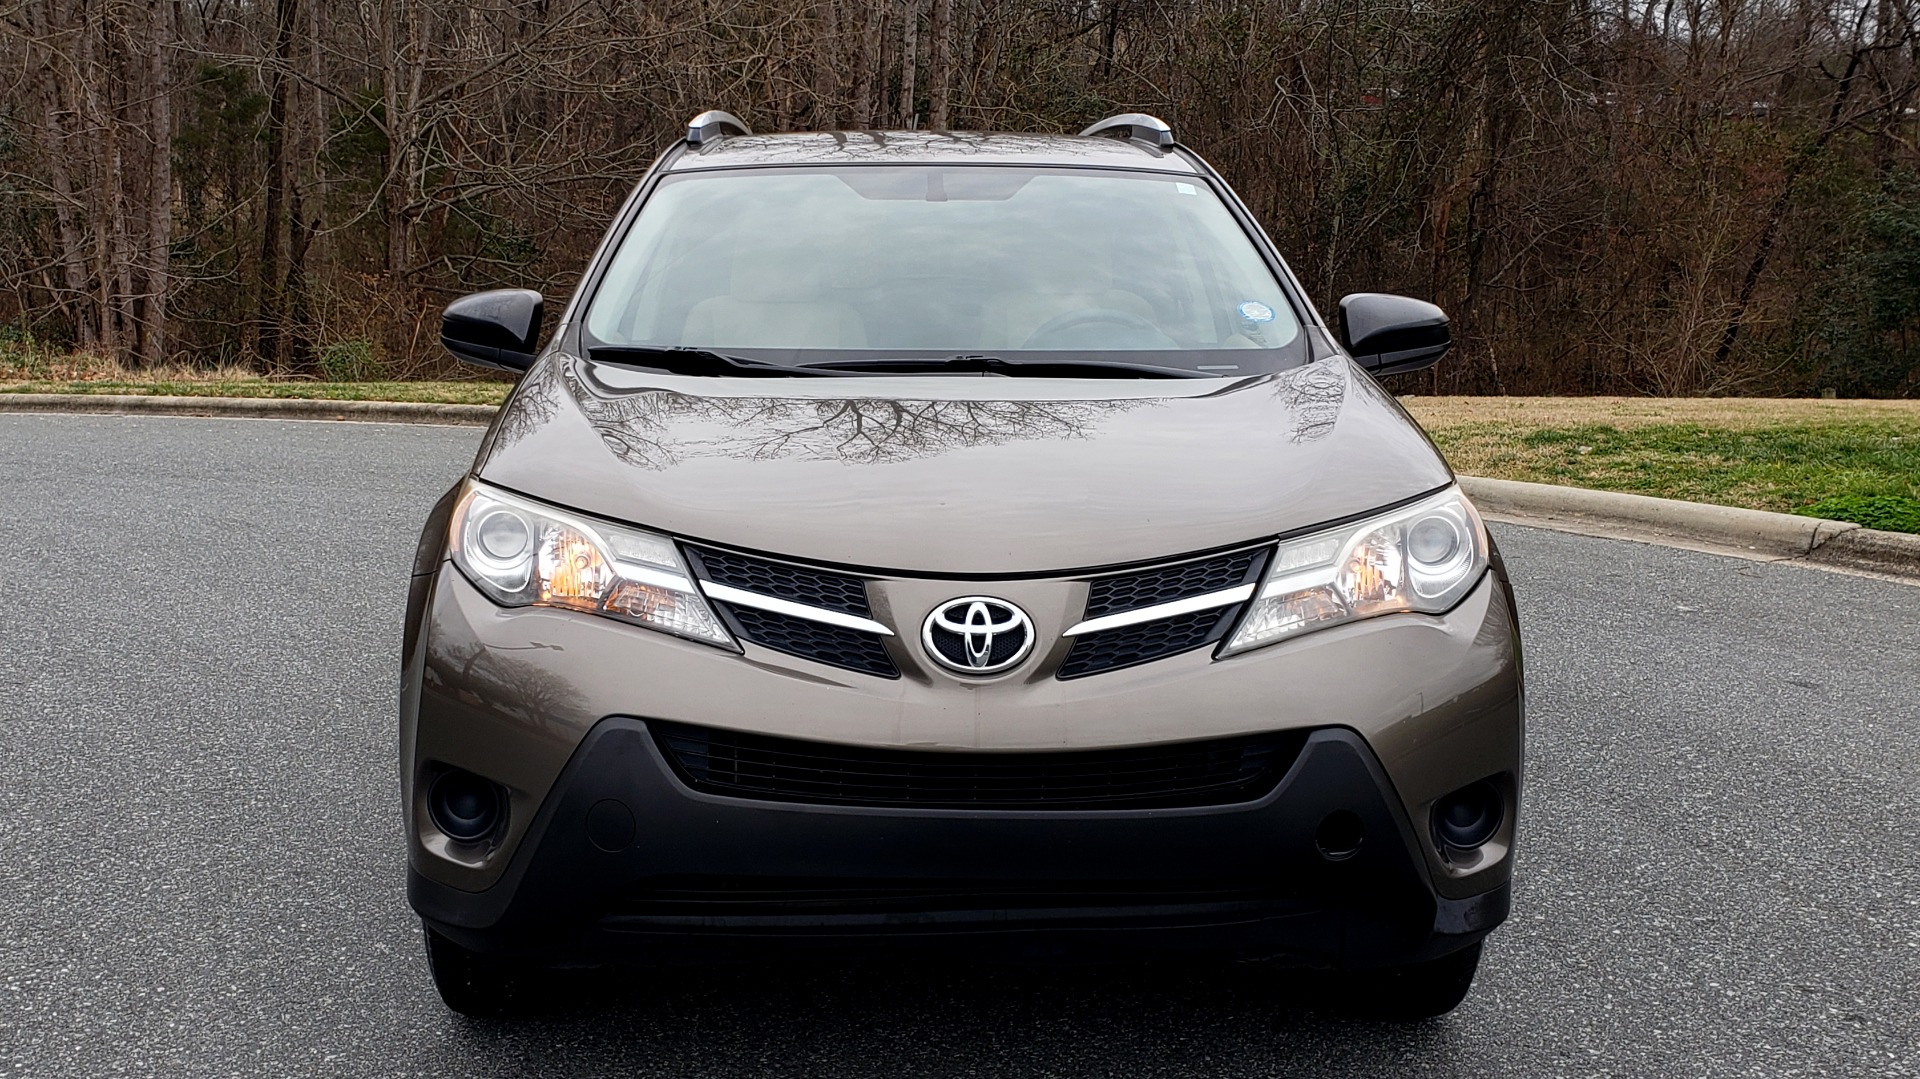 Used 2013 Toyota RAV4 LE / AUTO / FWD / 29 MPG HWY / CLEAN CARFAX for sale Sold at Formula Imports in Charlotte NC 28227 20